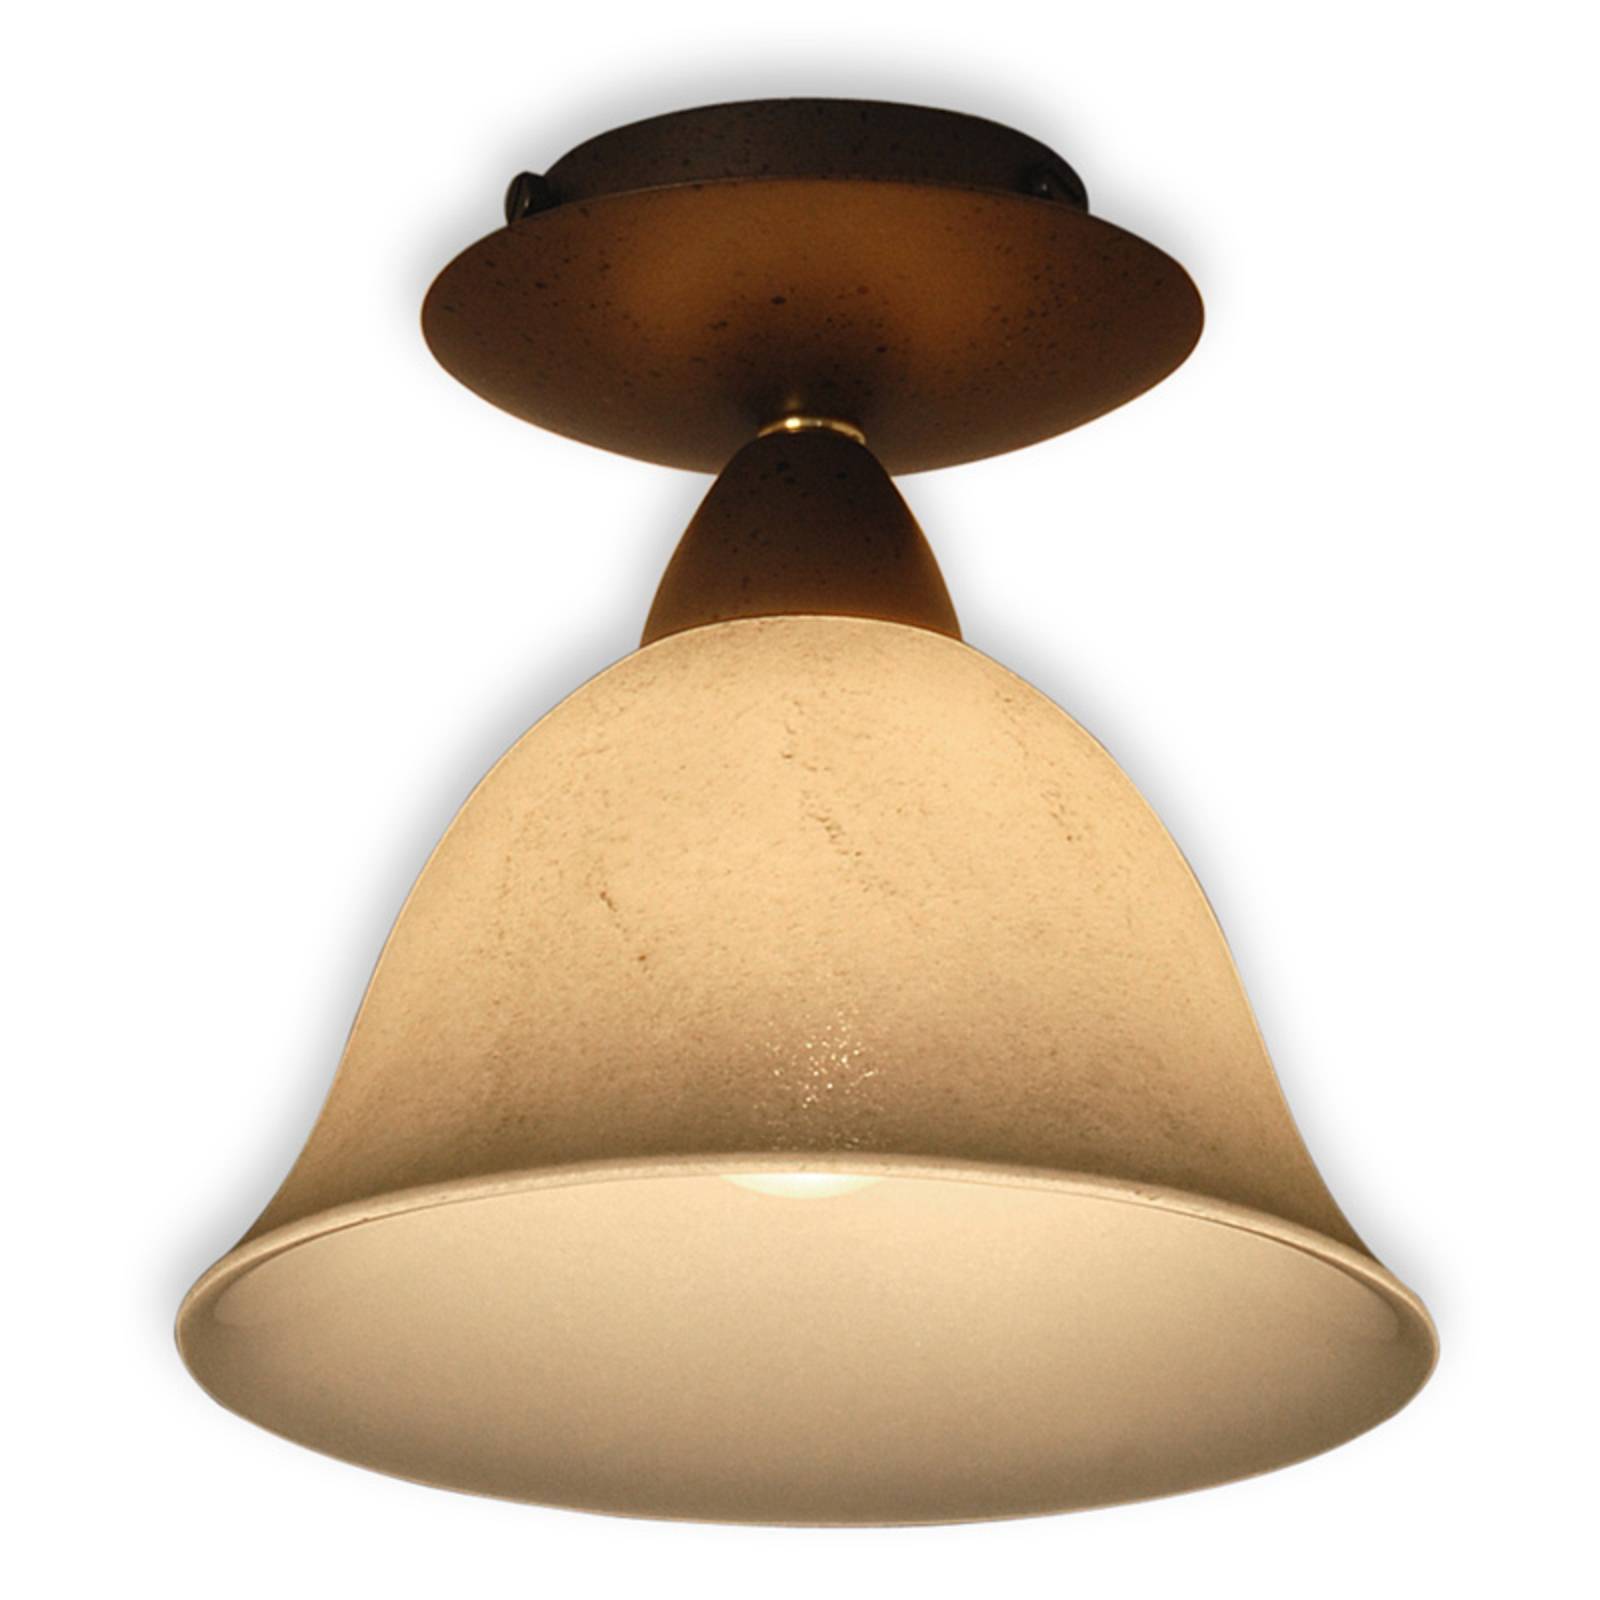 Pusta - ceiling light with scavo smoked glass